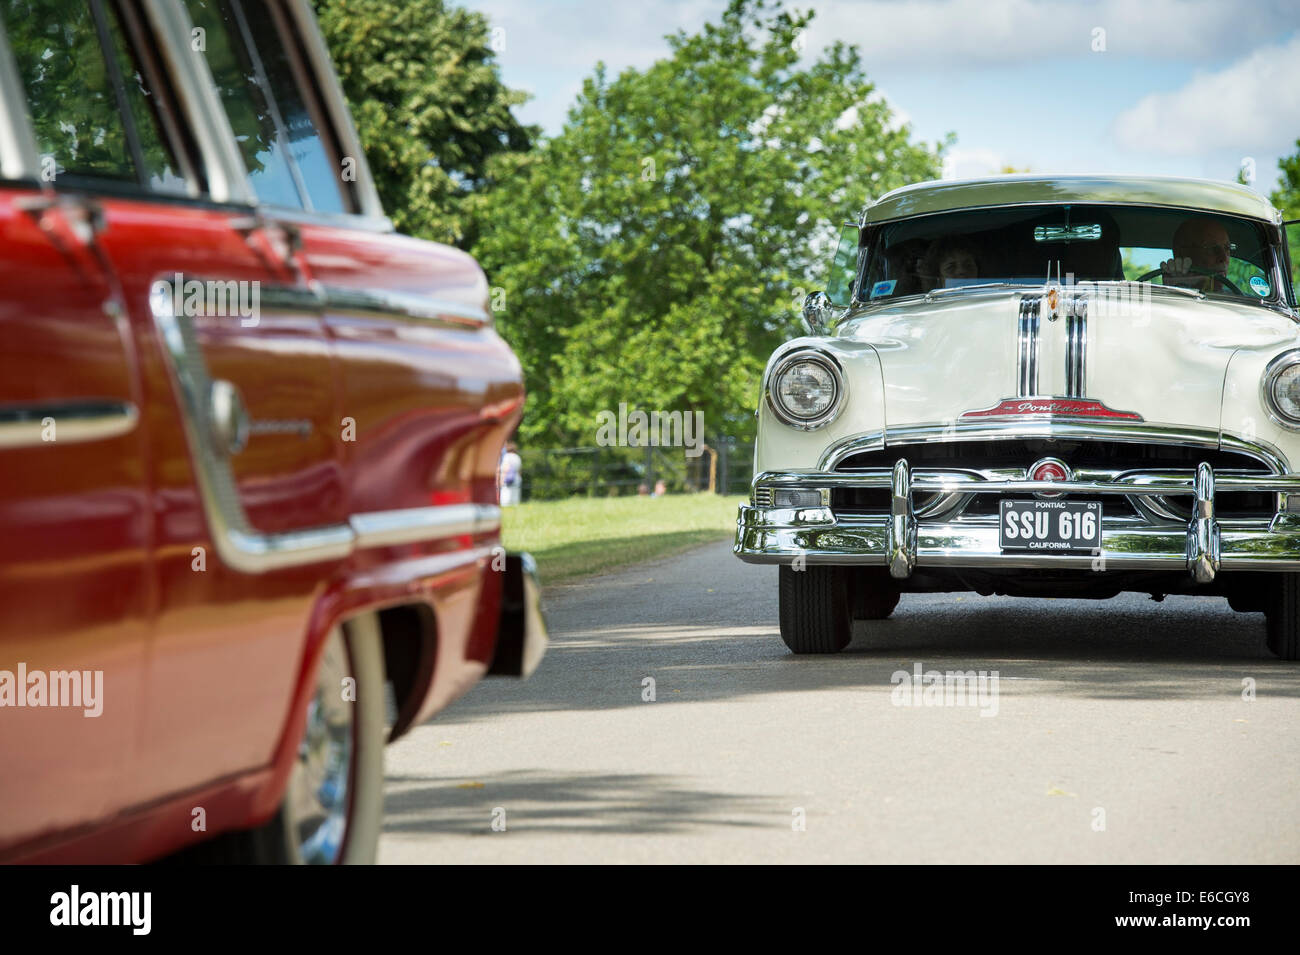 1953 Pontiac Eight Chieftain at an american car show. UK. Classic vintage American car Stock Photo